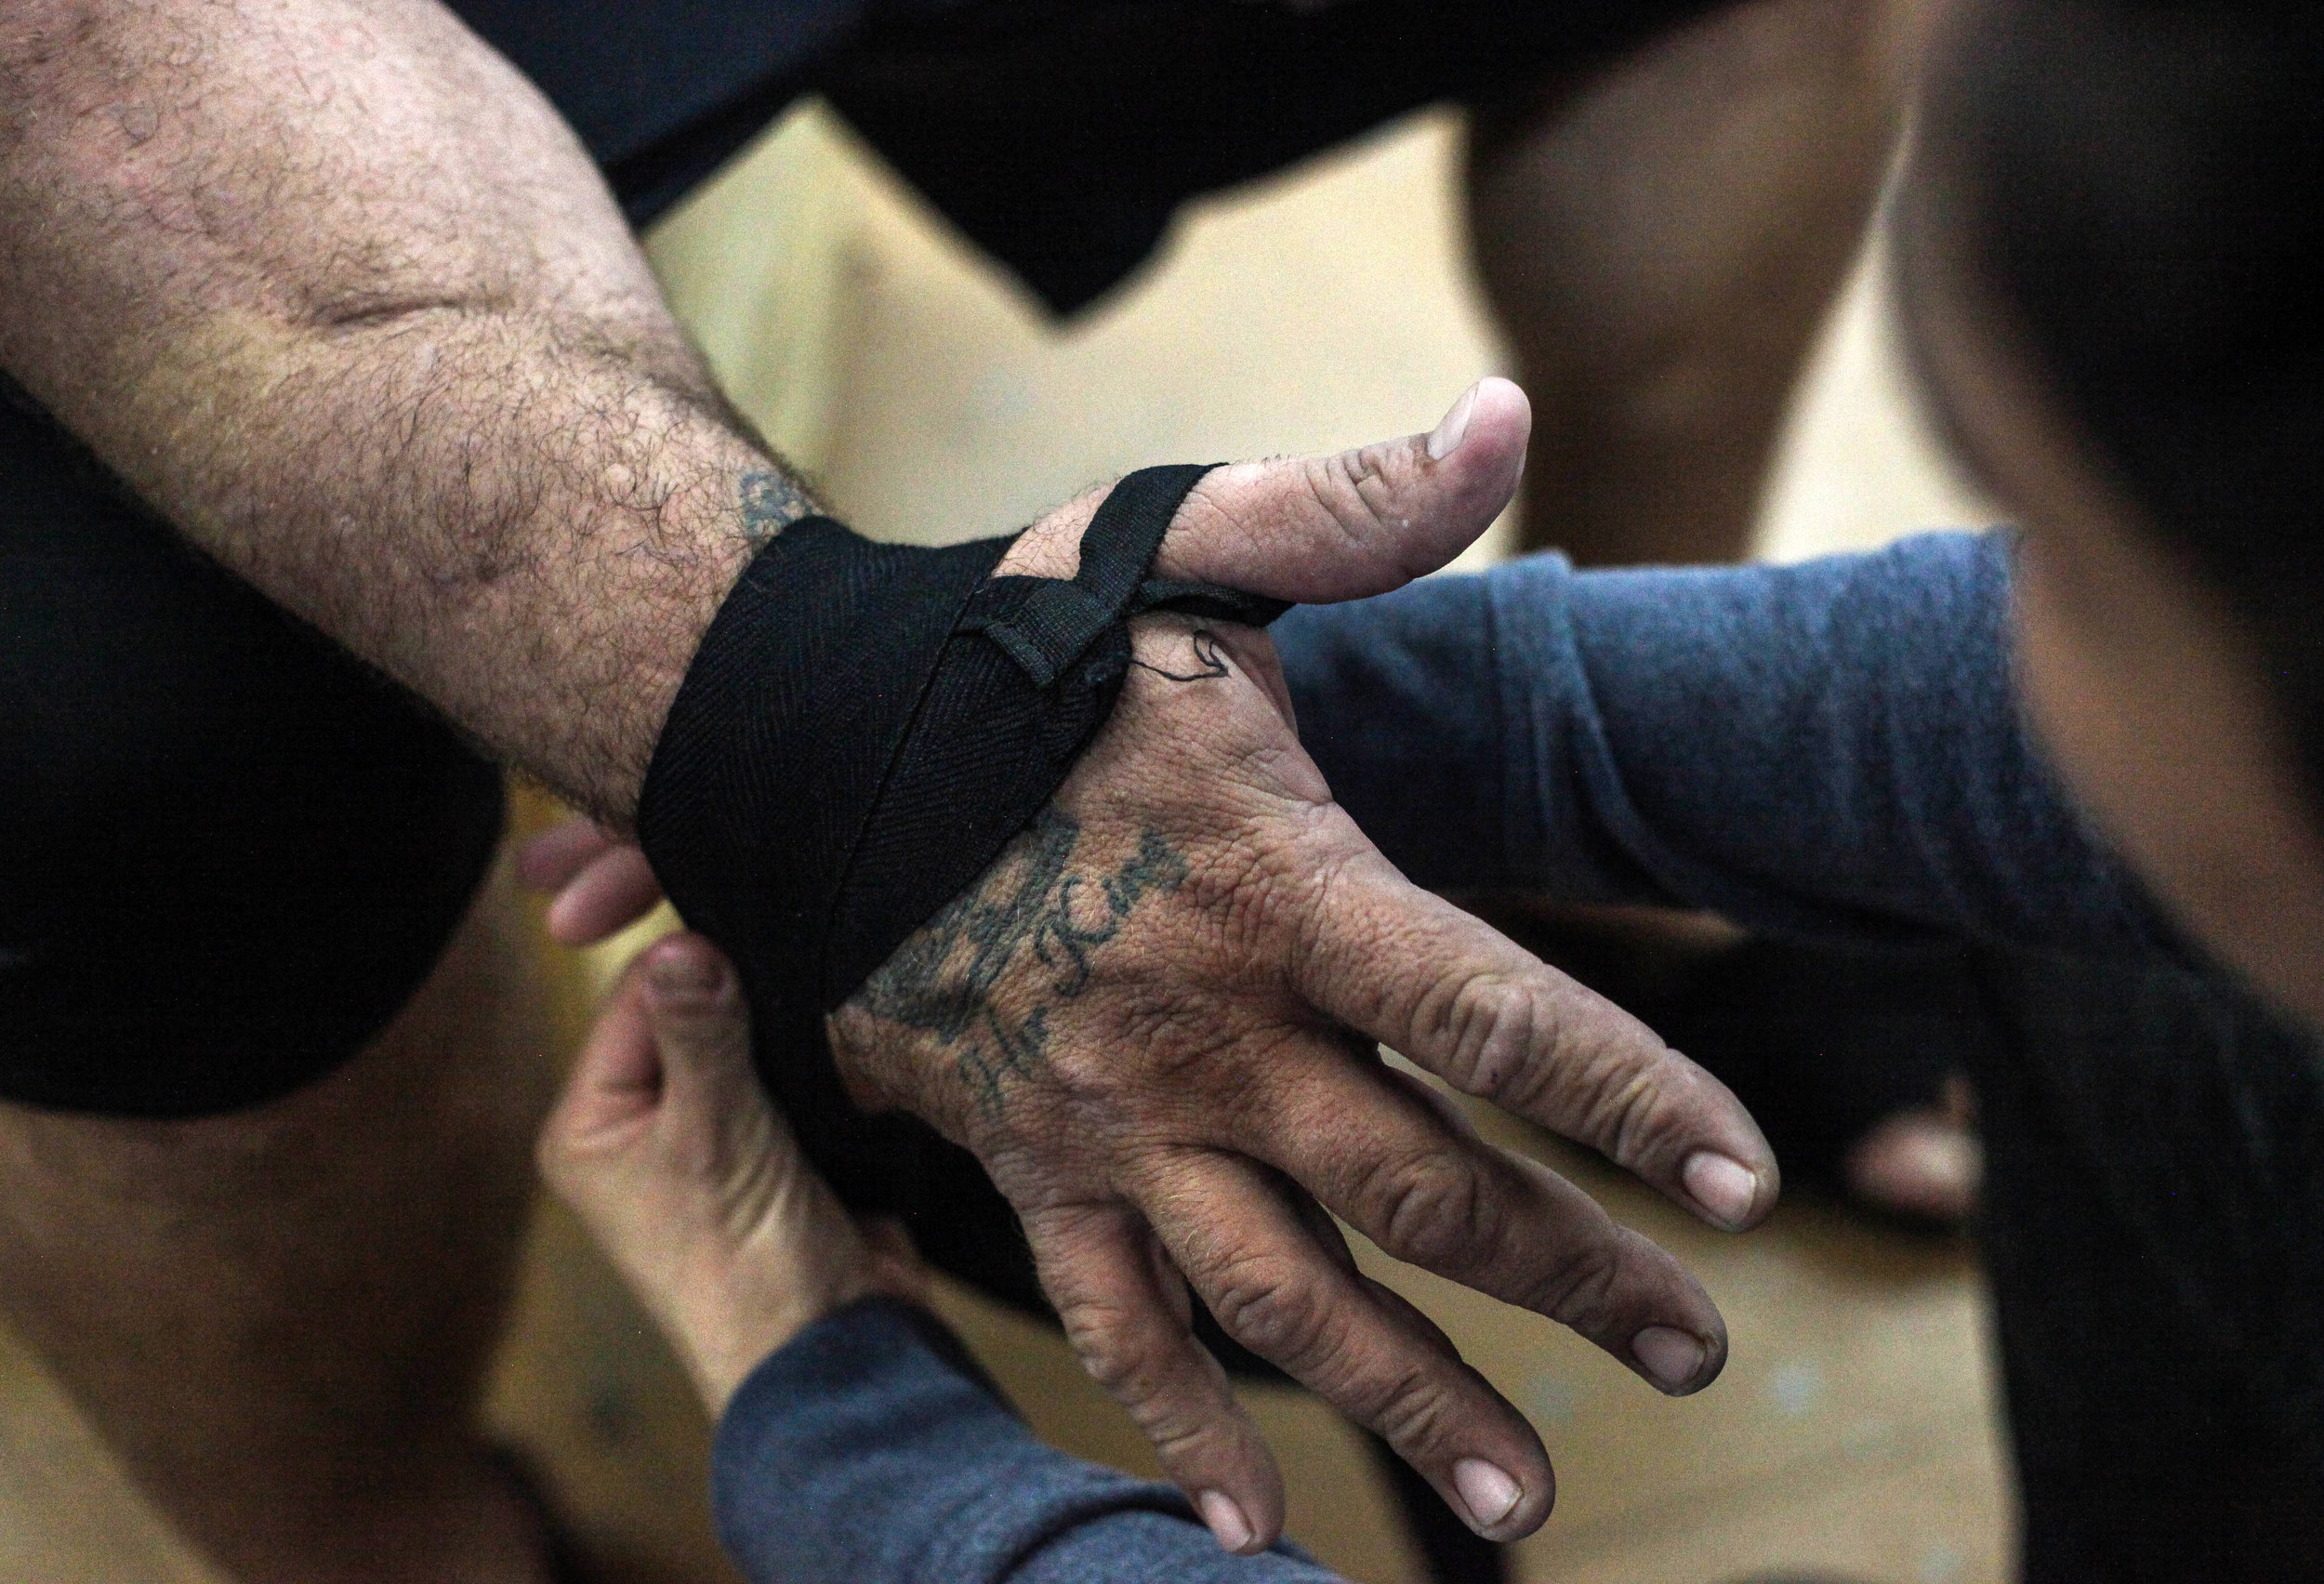  Stacy Aguilar wraps her husband Johnny's hands at Victoria Brazilian Jiu-Jitsu in Victoria, Texas on Wednesday, Sept. 26, 2018. He proposed to her during one of her first mixed martial arts fights and the rest is history, Aguilar says. 